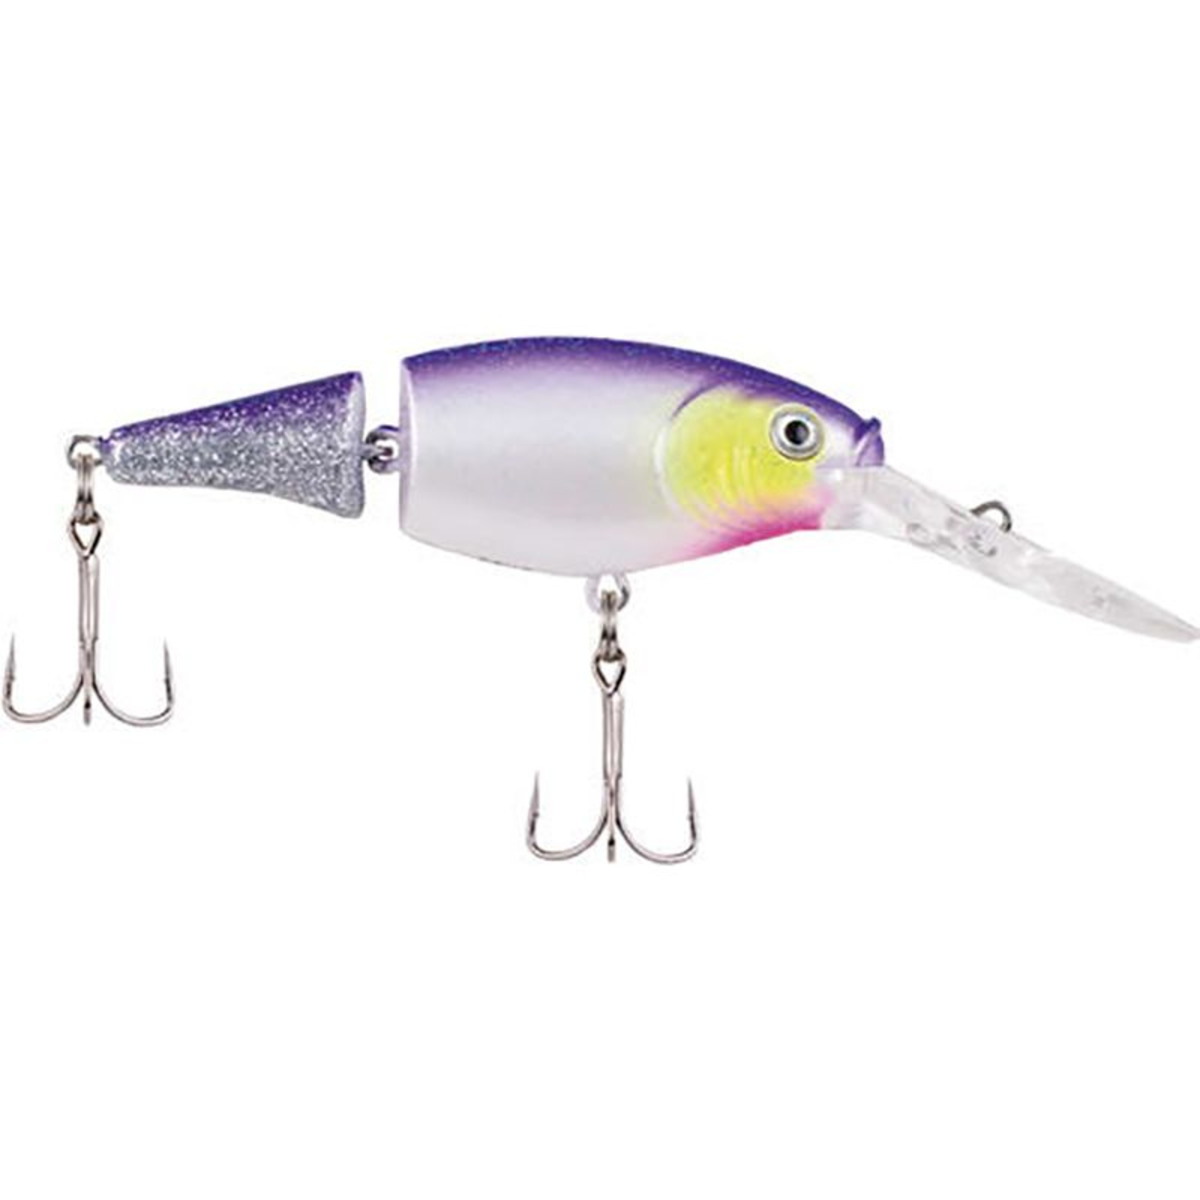 Berkley Flicker Shad Jointed Fire Tail - 7 cm - 8.5 g - Rico Suave